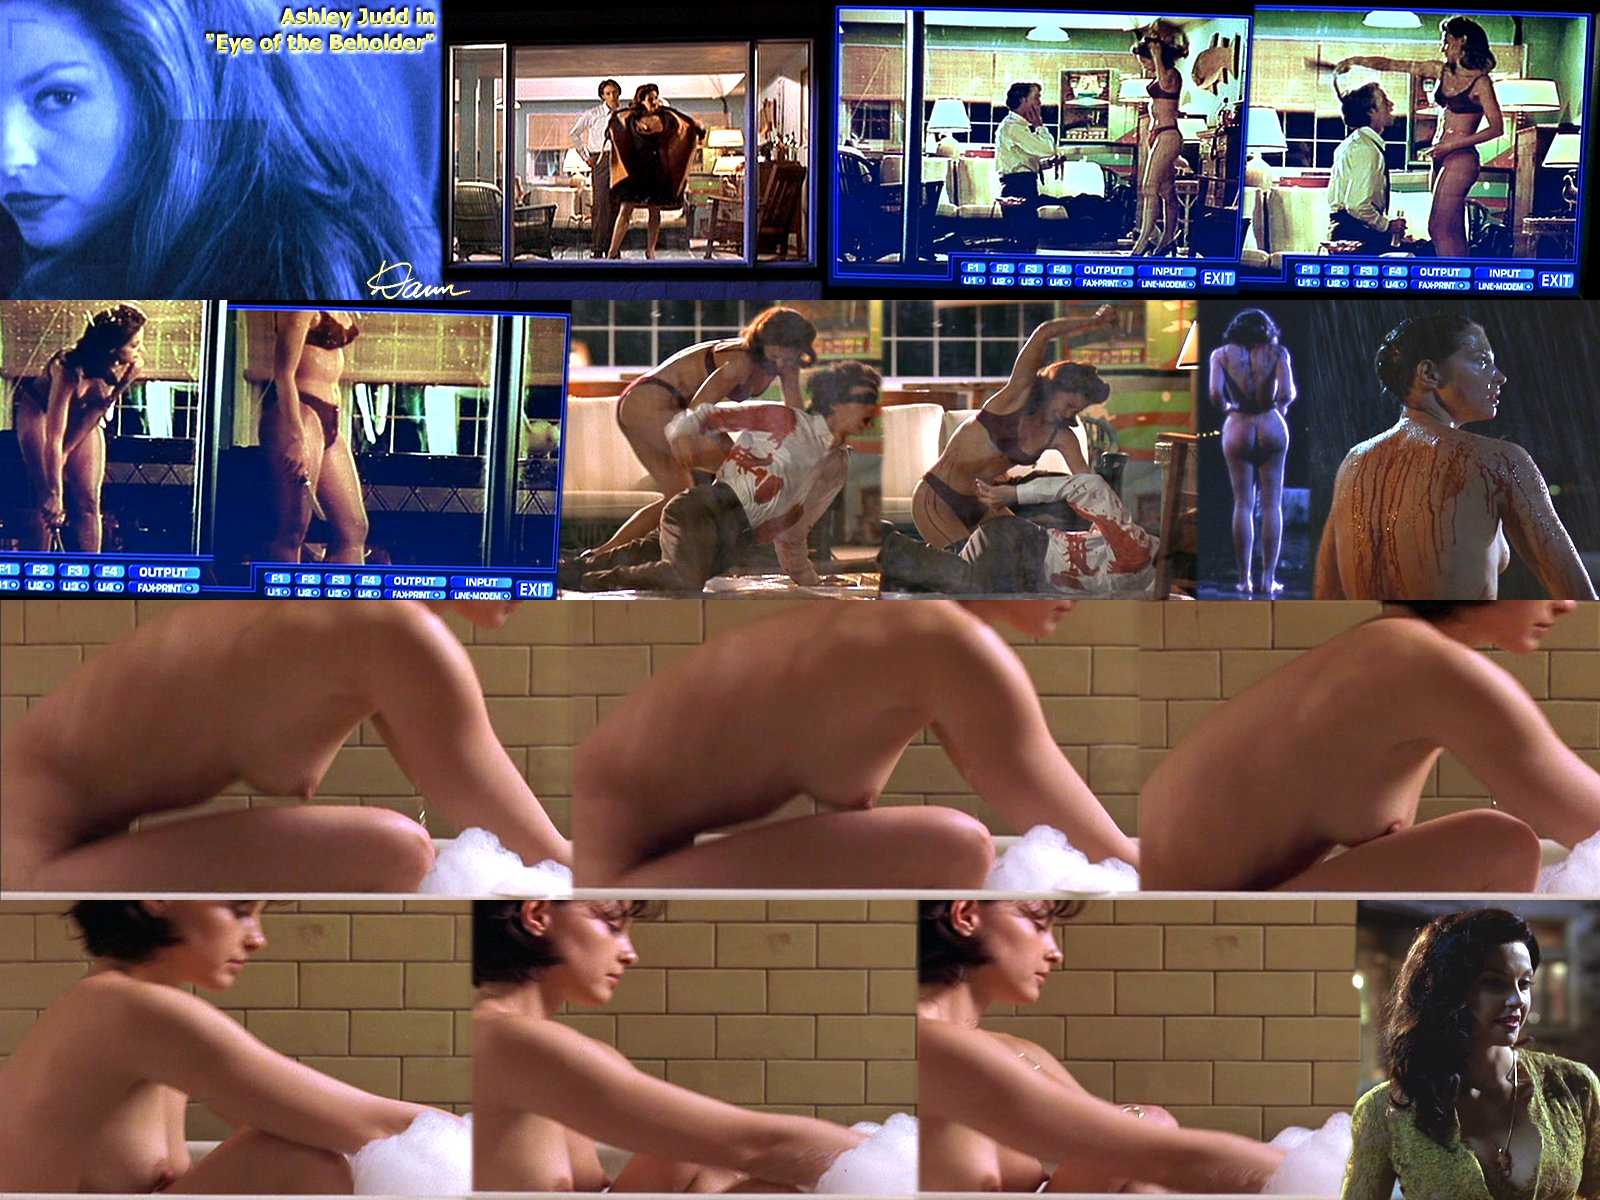 Ashley judd nude pictures - 🧡 Ashley Judd nude pics, pagina - 3 A...